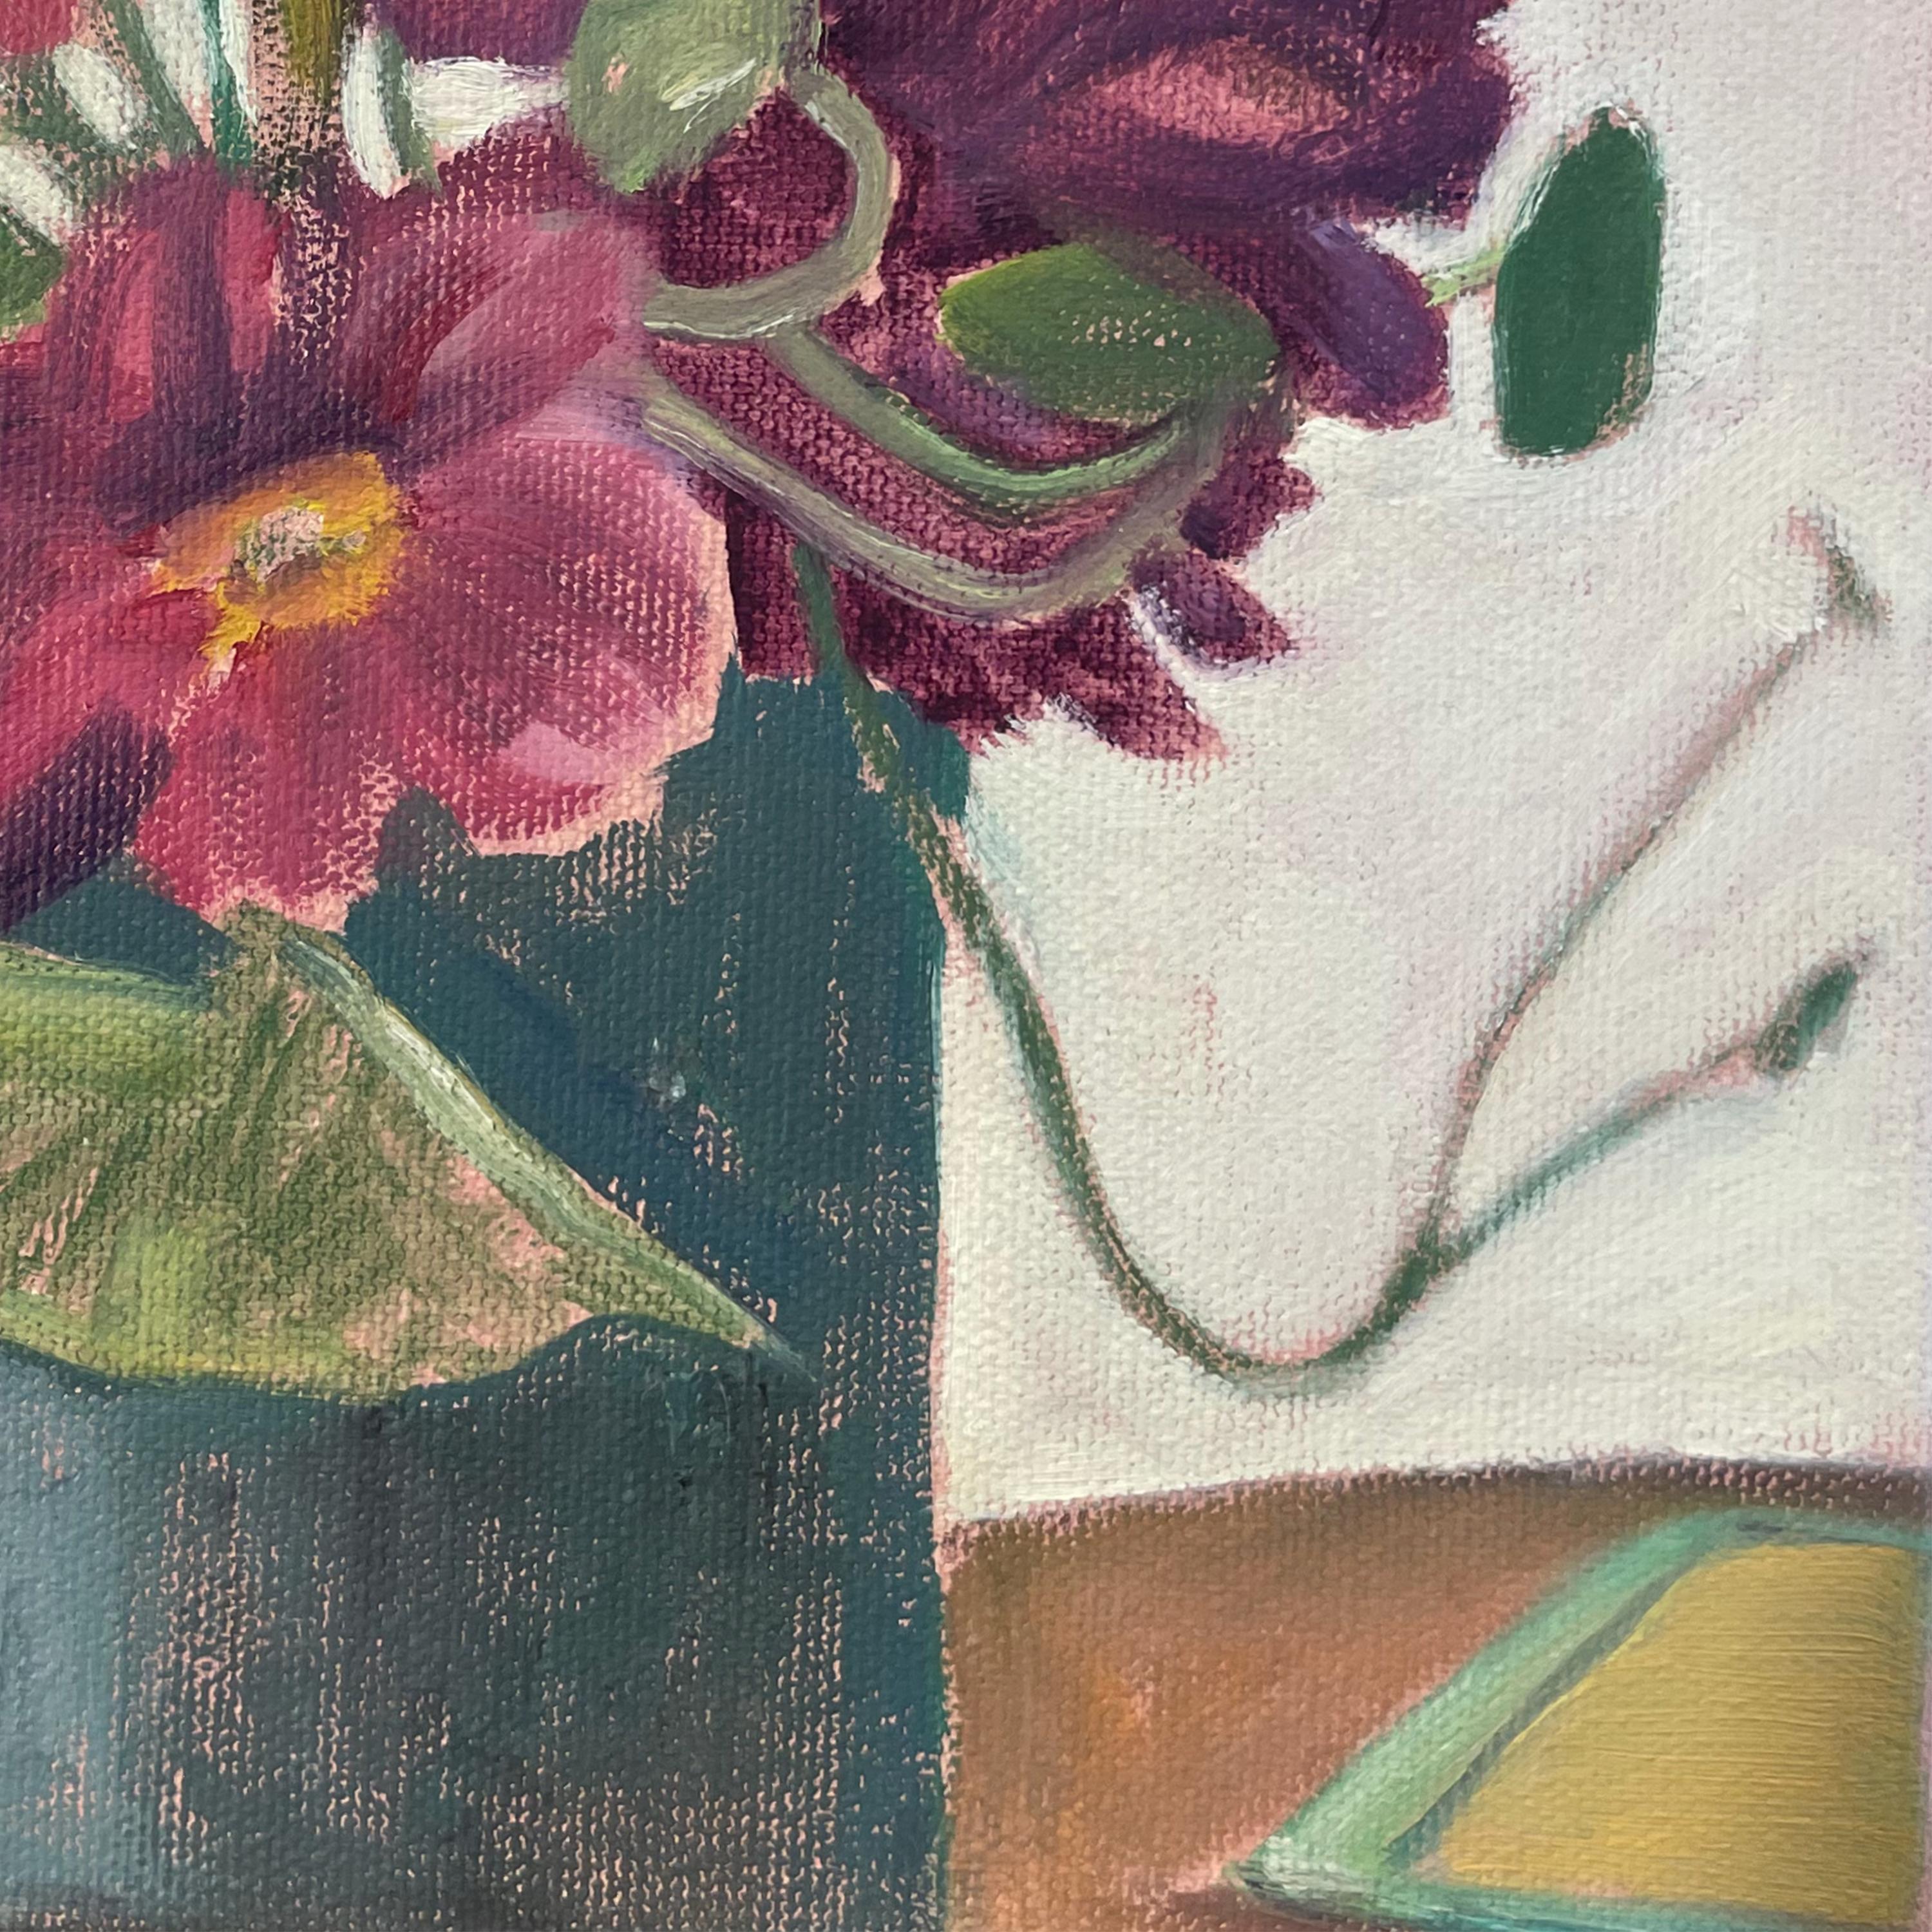 Cosmos & Zinnias, 2021, oil on canvas, floral still life painting - Painting by Daisy Craddock